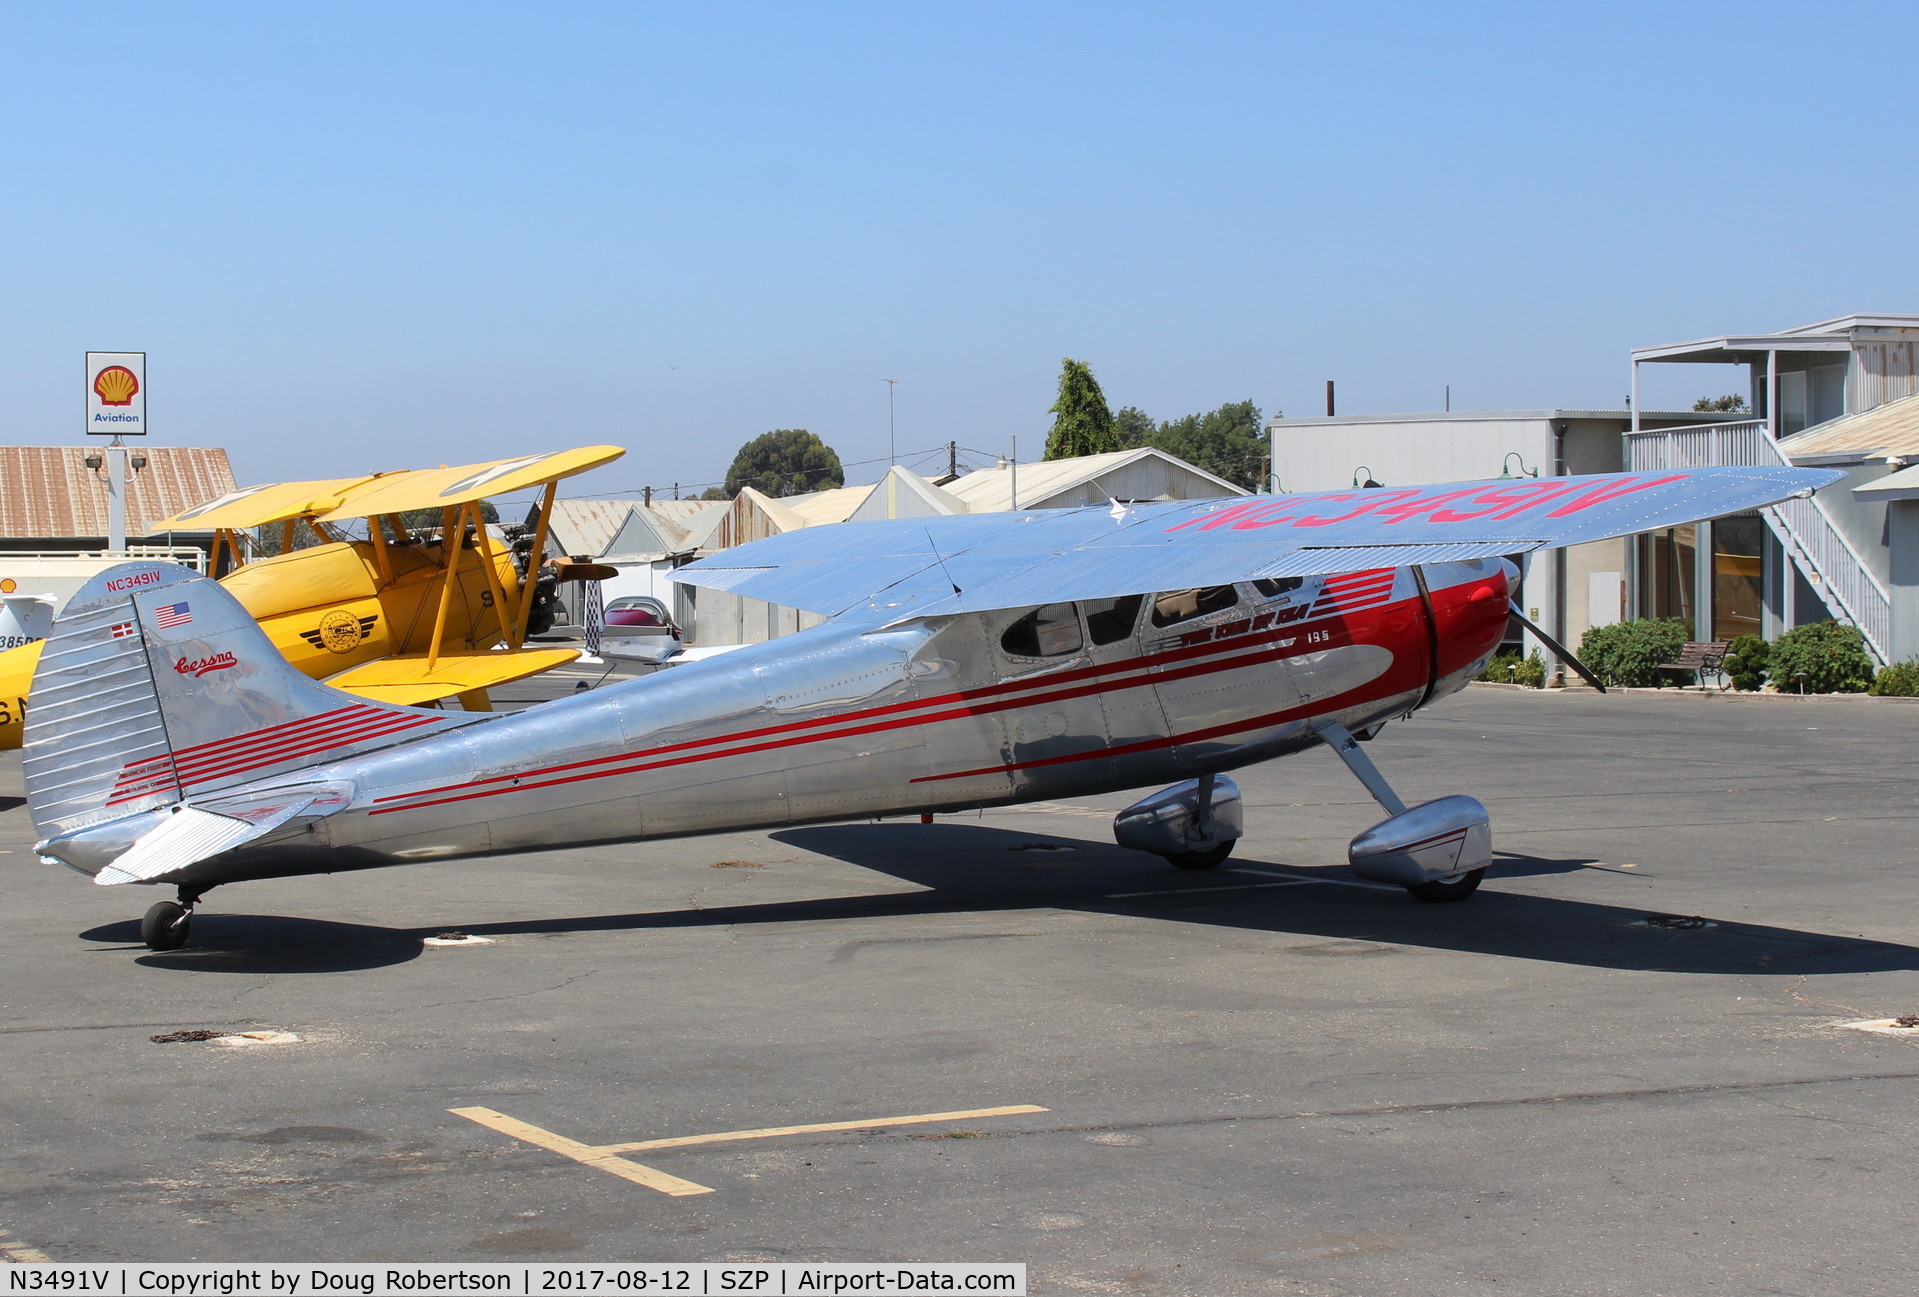 N3491V, 1948 Cessna 195 C/N 7195, 1948 Cessna 195 BUSINESSLINER, Jacobs L4/R755-7 245 Hp radial engine.  Outstanding appearance/condition!